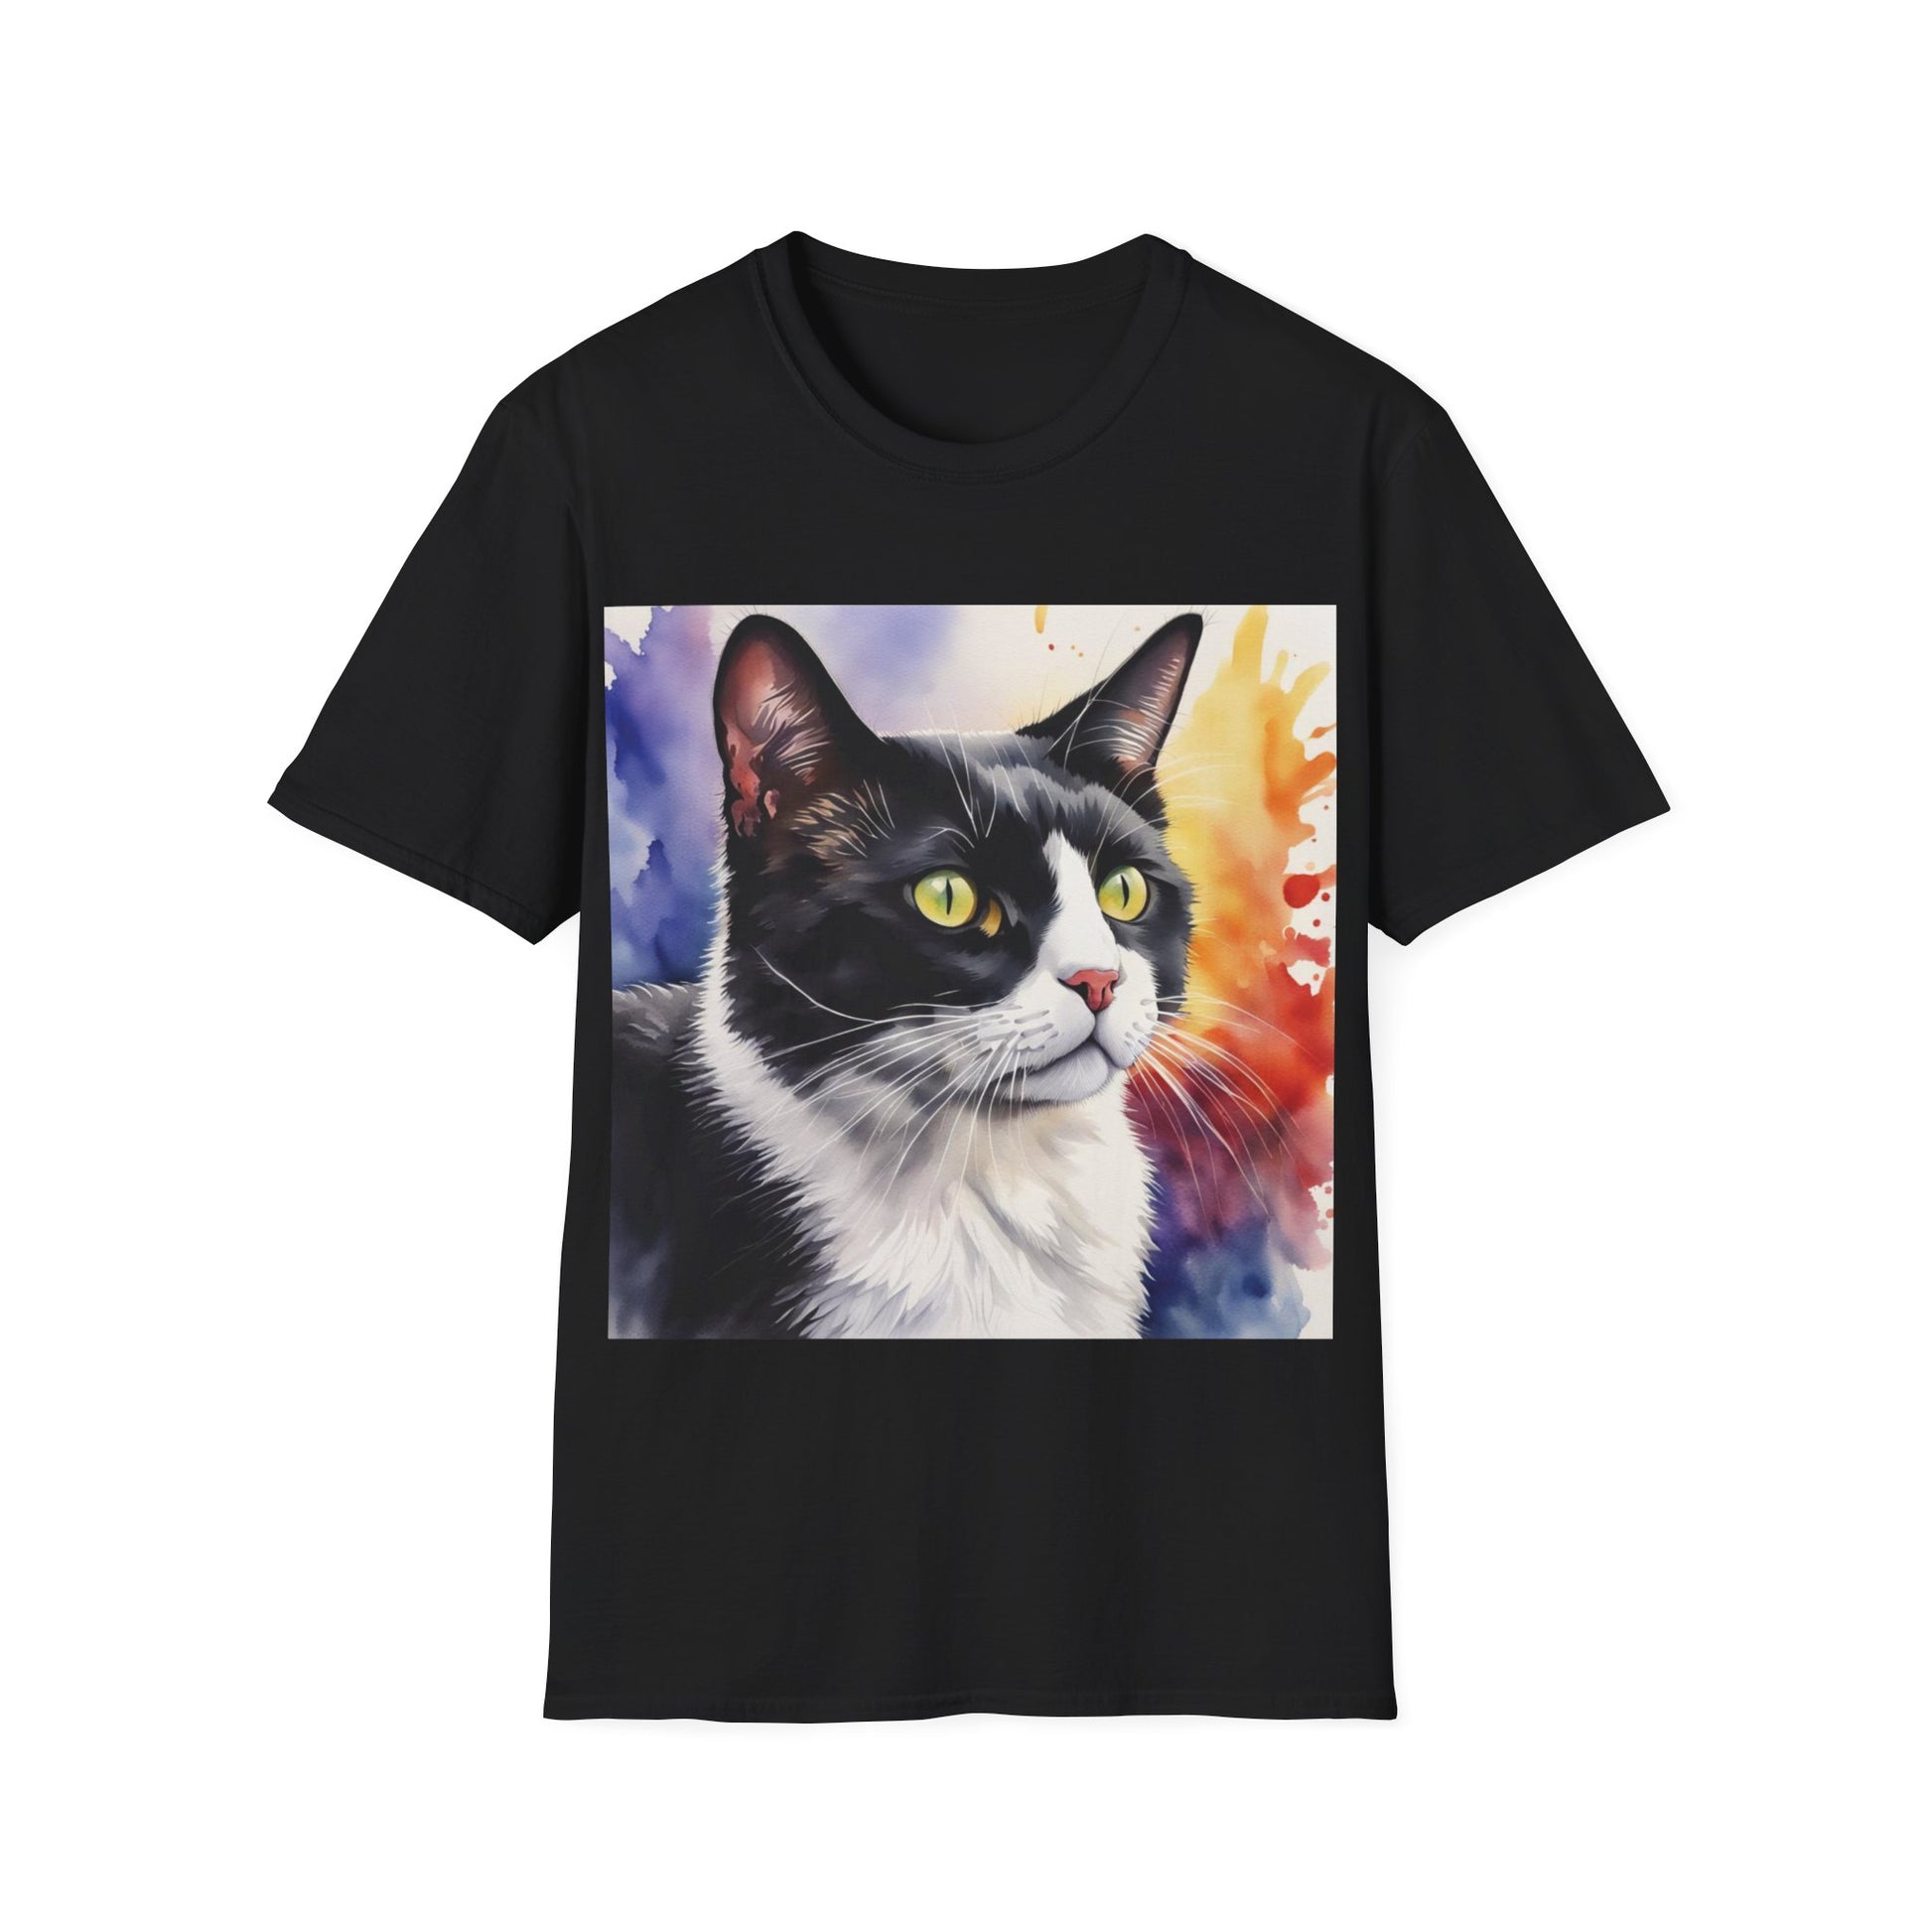 A black t-shirt with a design of a black and white cat painted in watercolours.